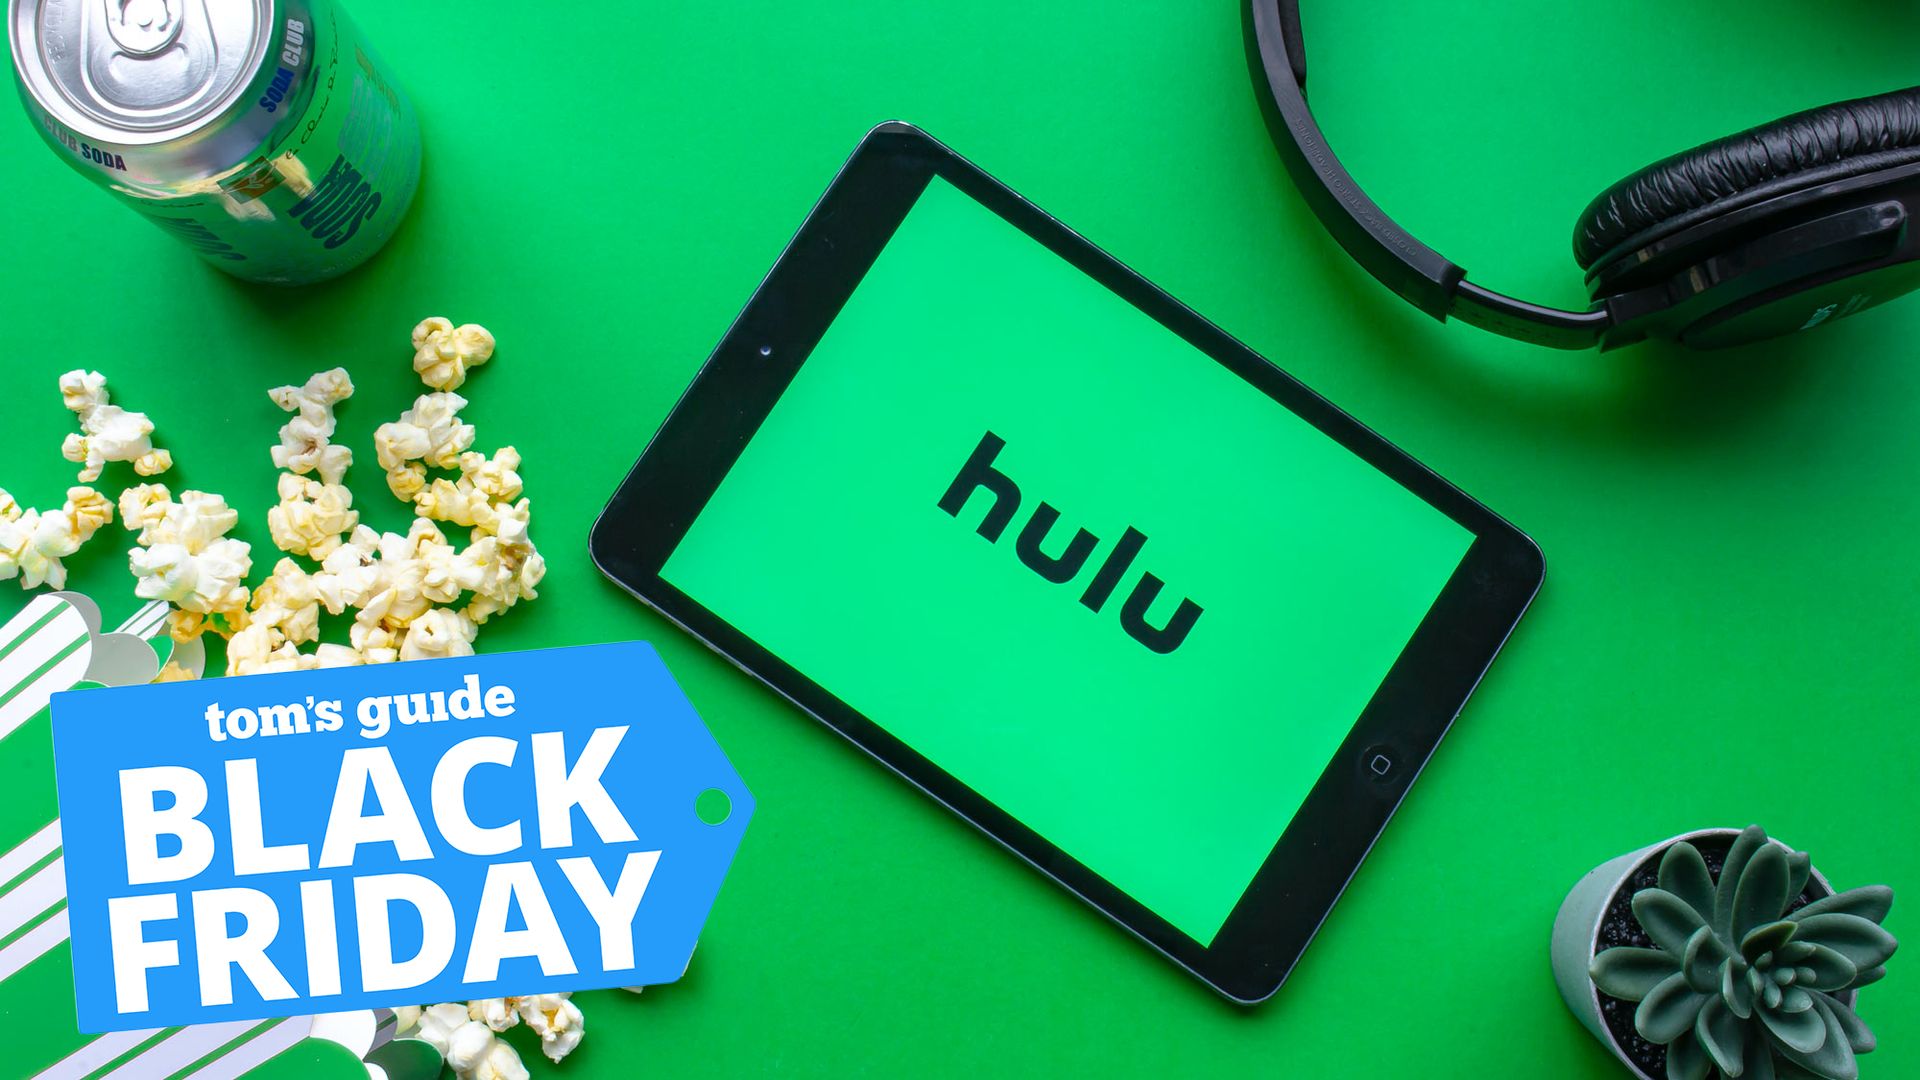 Hulu Black Friday deal drops price to 99 cents — how to get it now